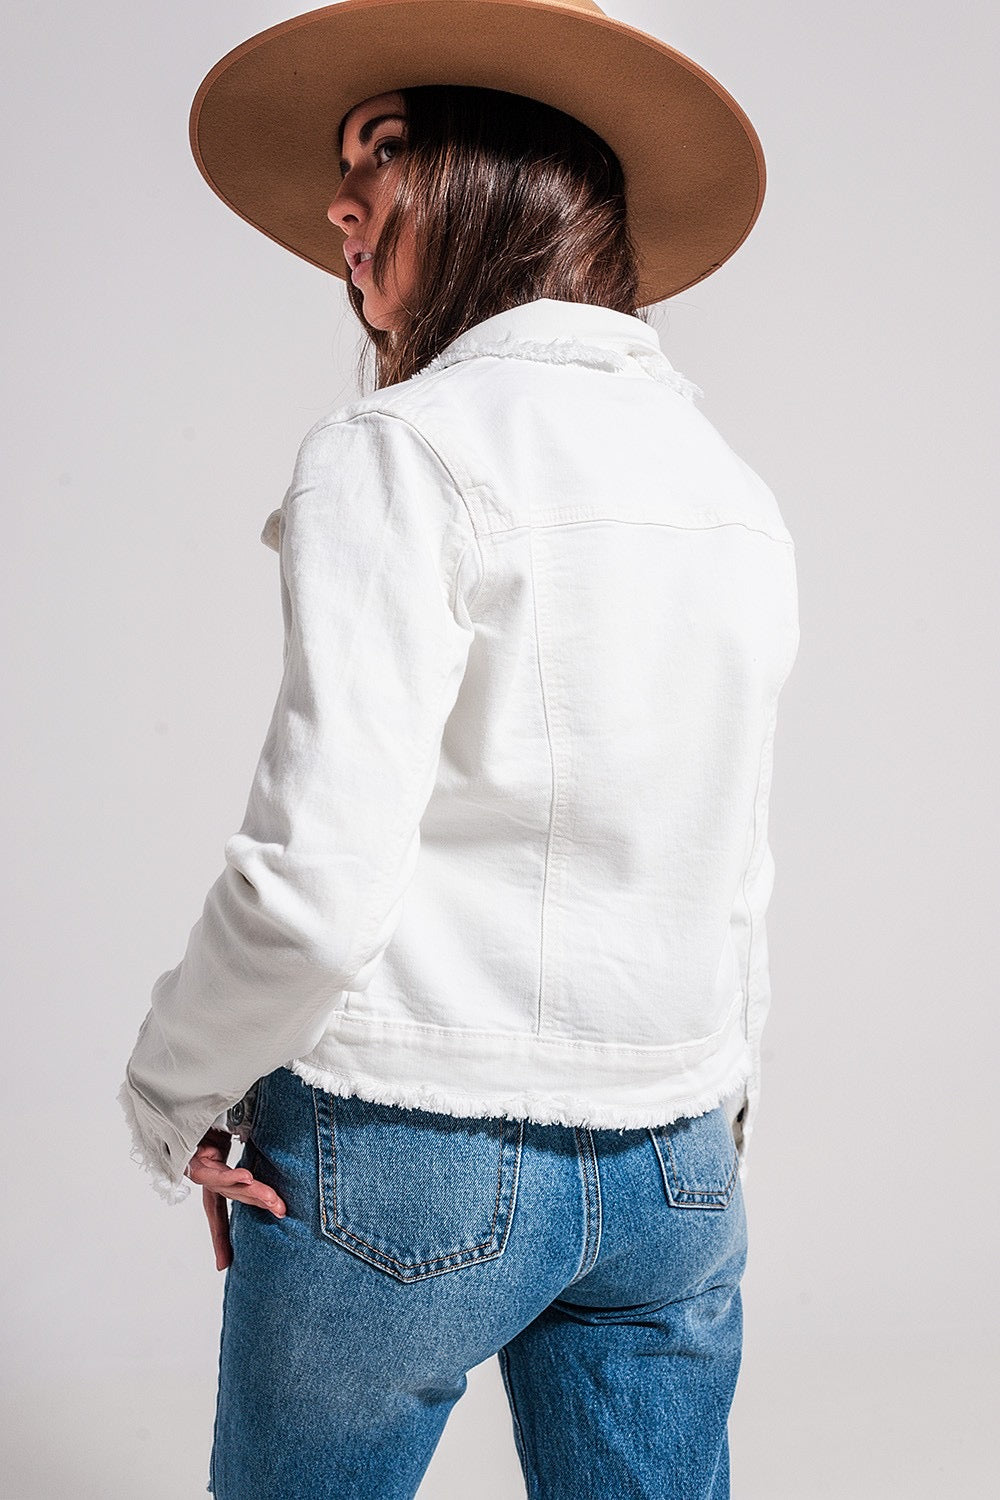 WOLVES RAW EDGE JEAN JACKET IN WHITE